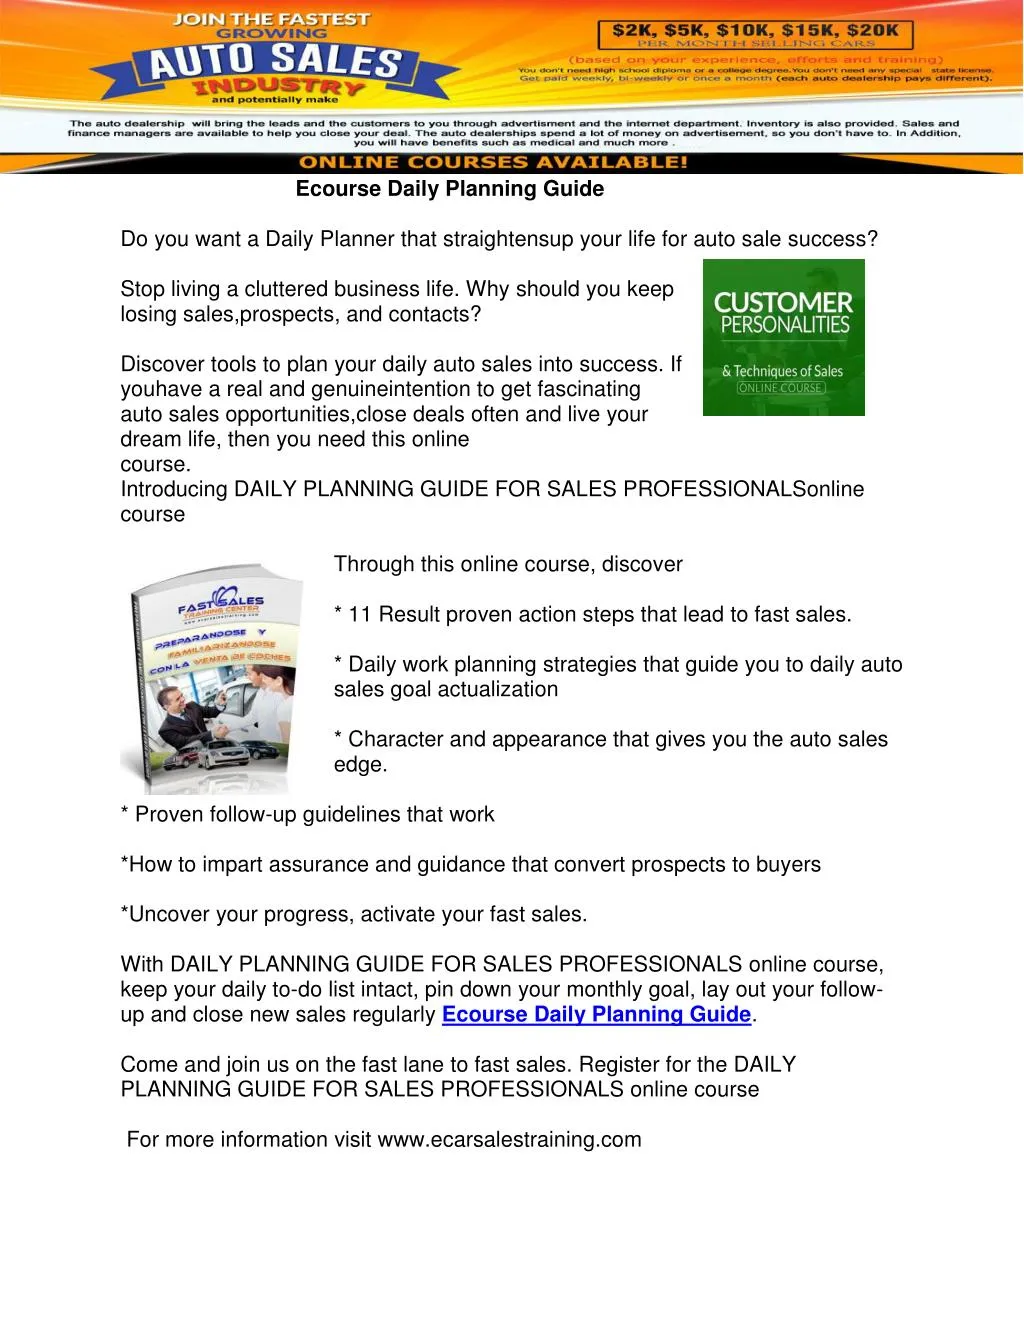 ecourse daily planning guide do you want a daily